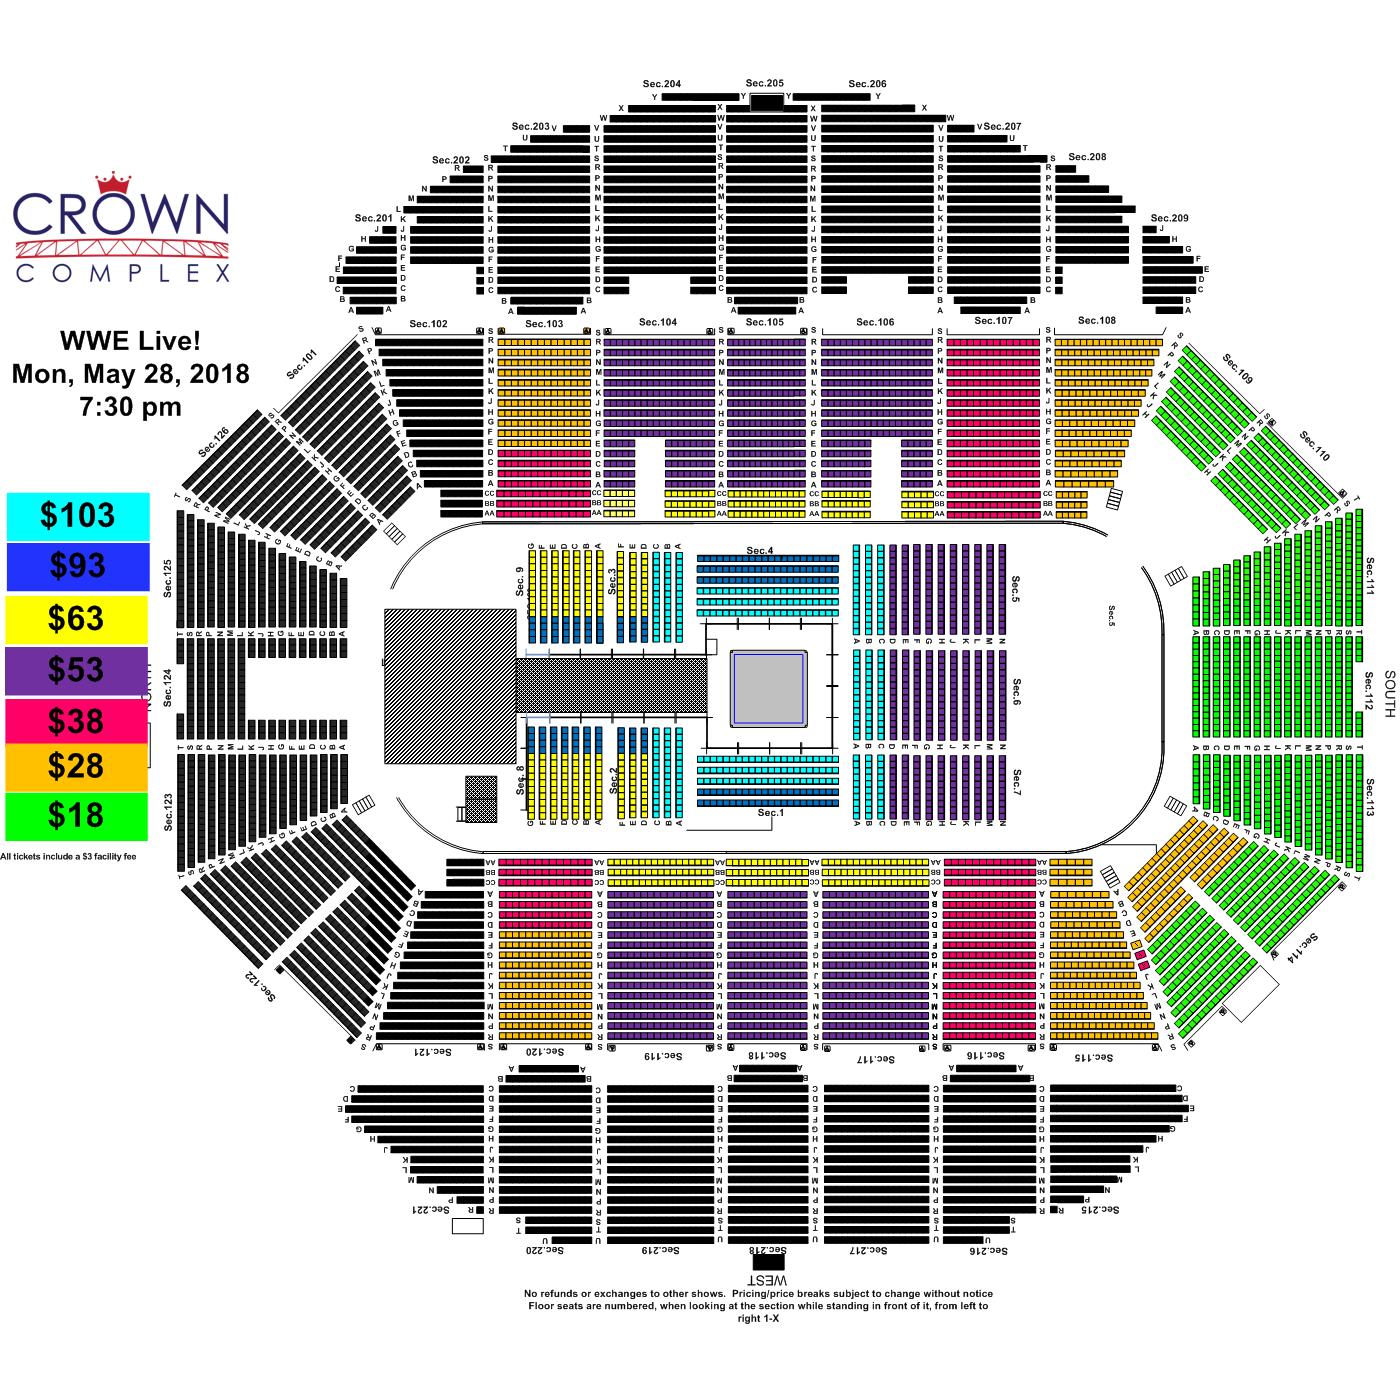 Crown Coliseum Seating Chart